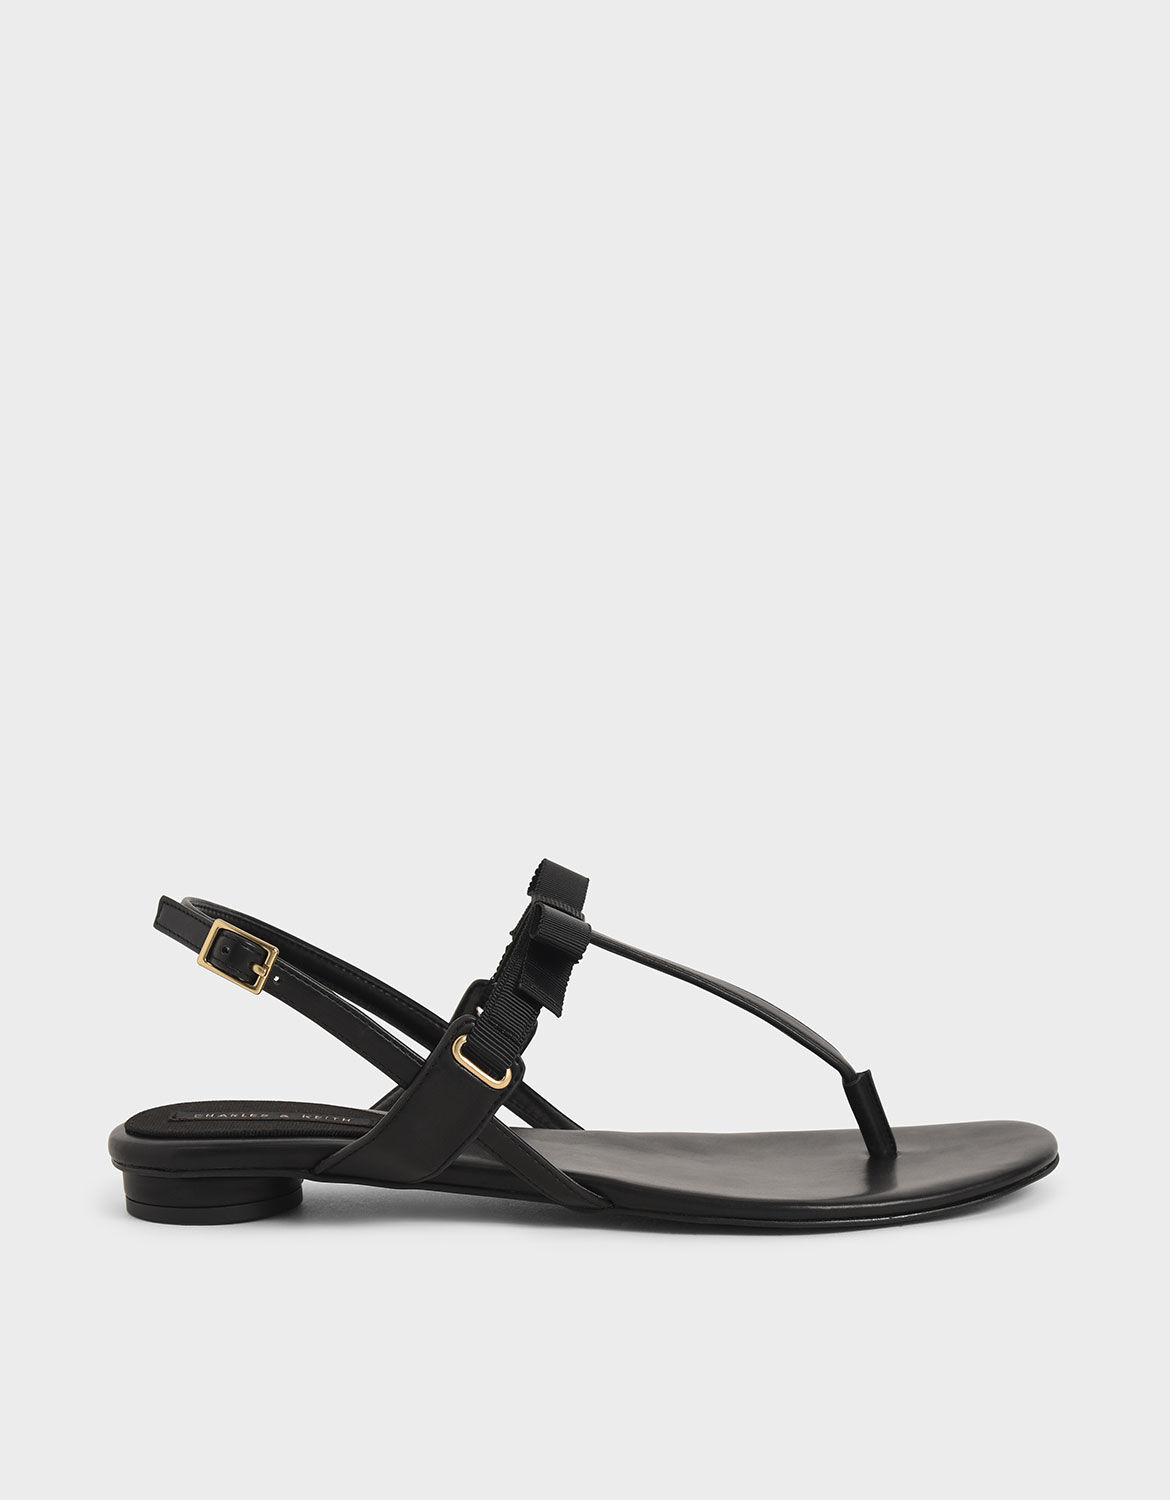 Shop Women's Flat Sandals | Exclusive Styles | CHARLES & KEITH SG